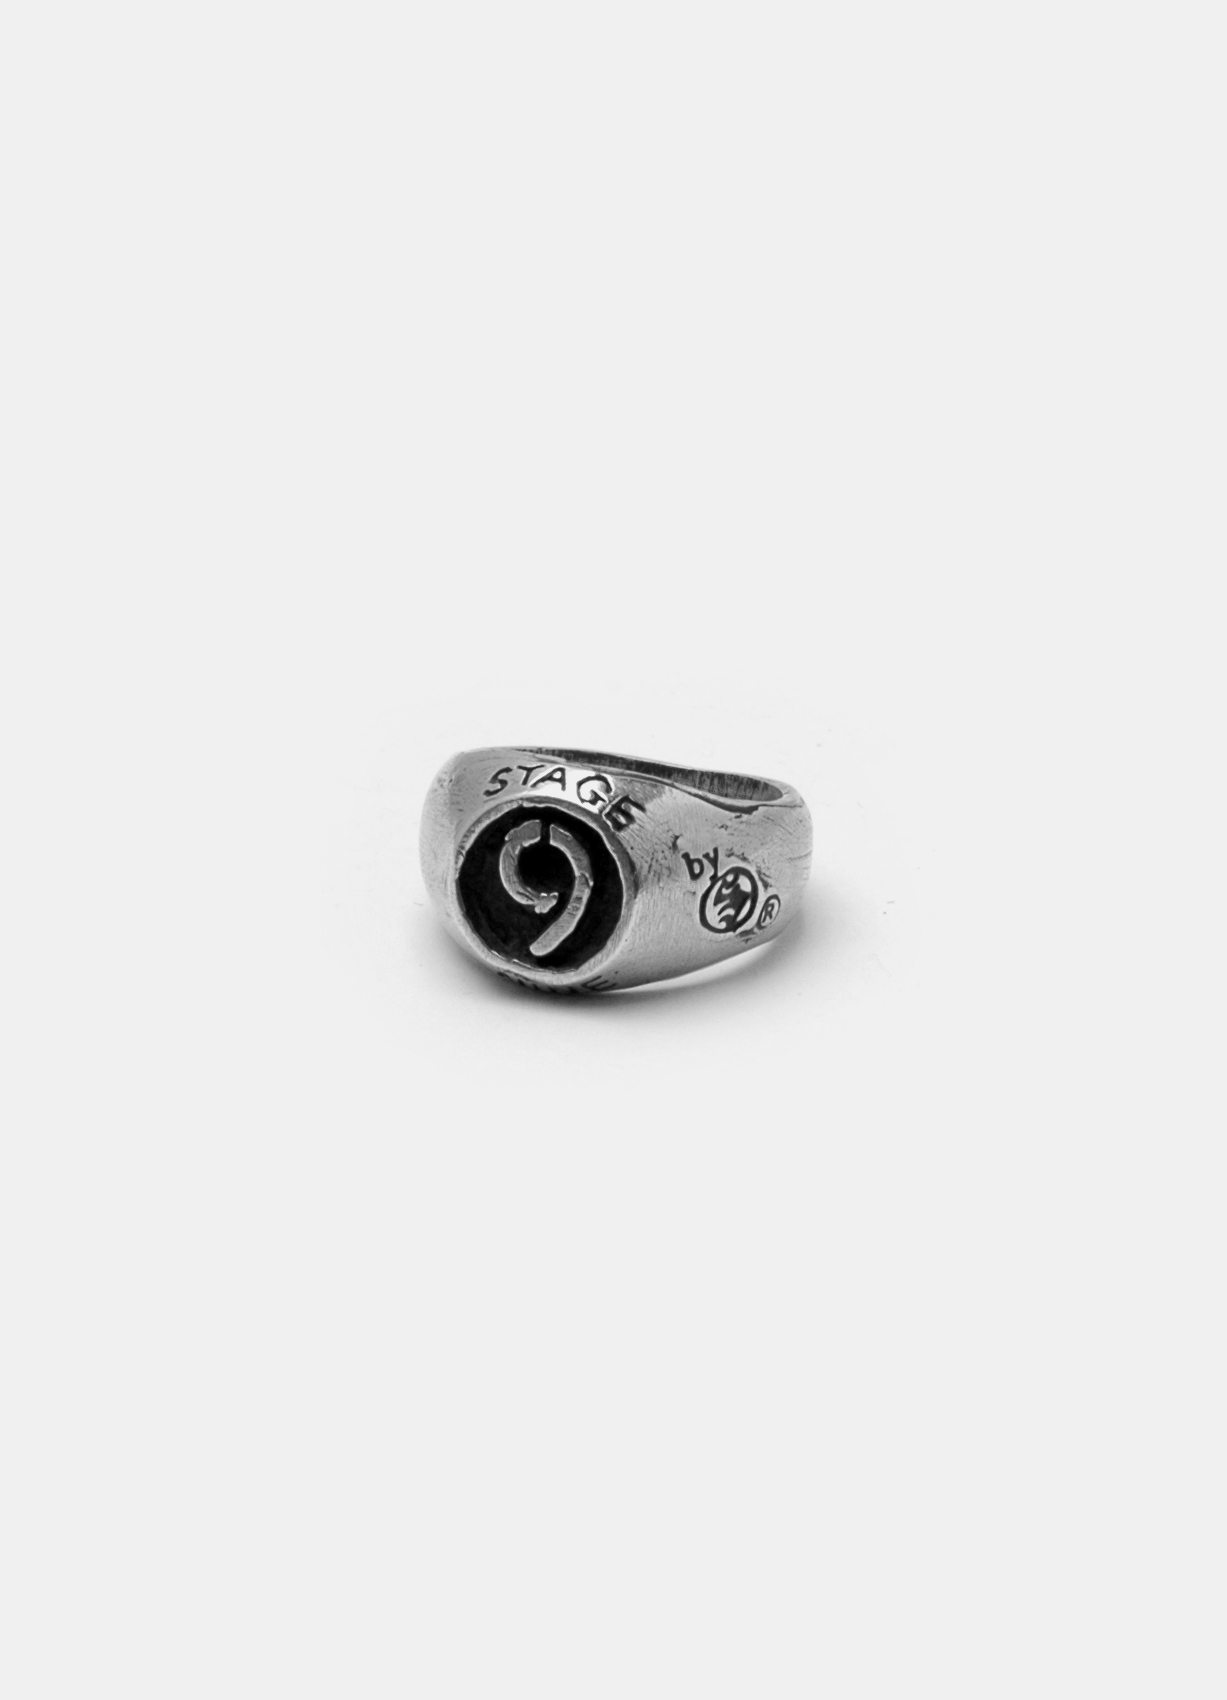 Stage9 Silver Ring